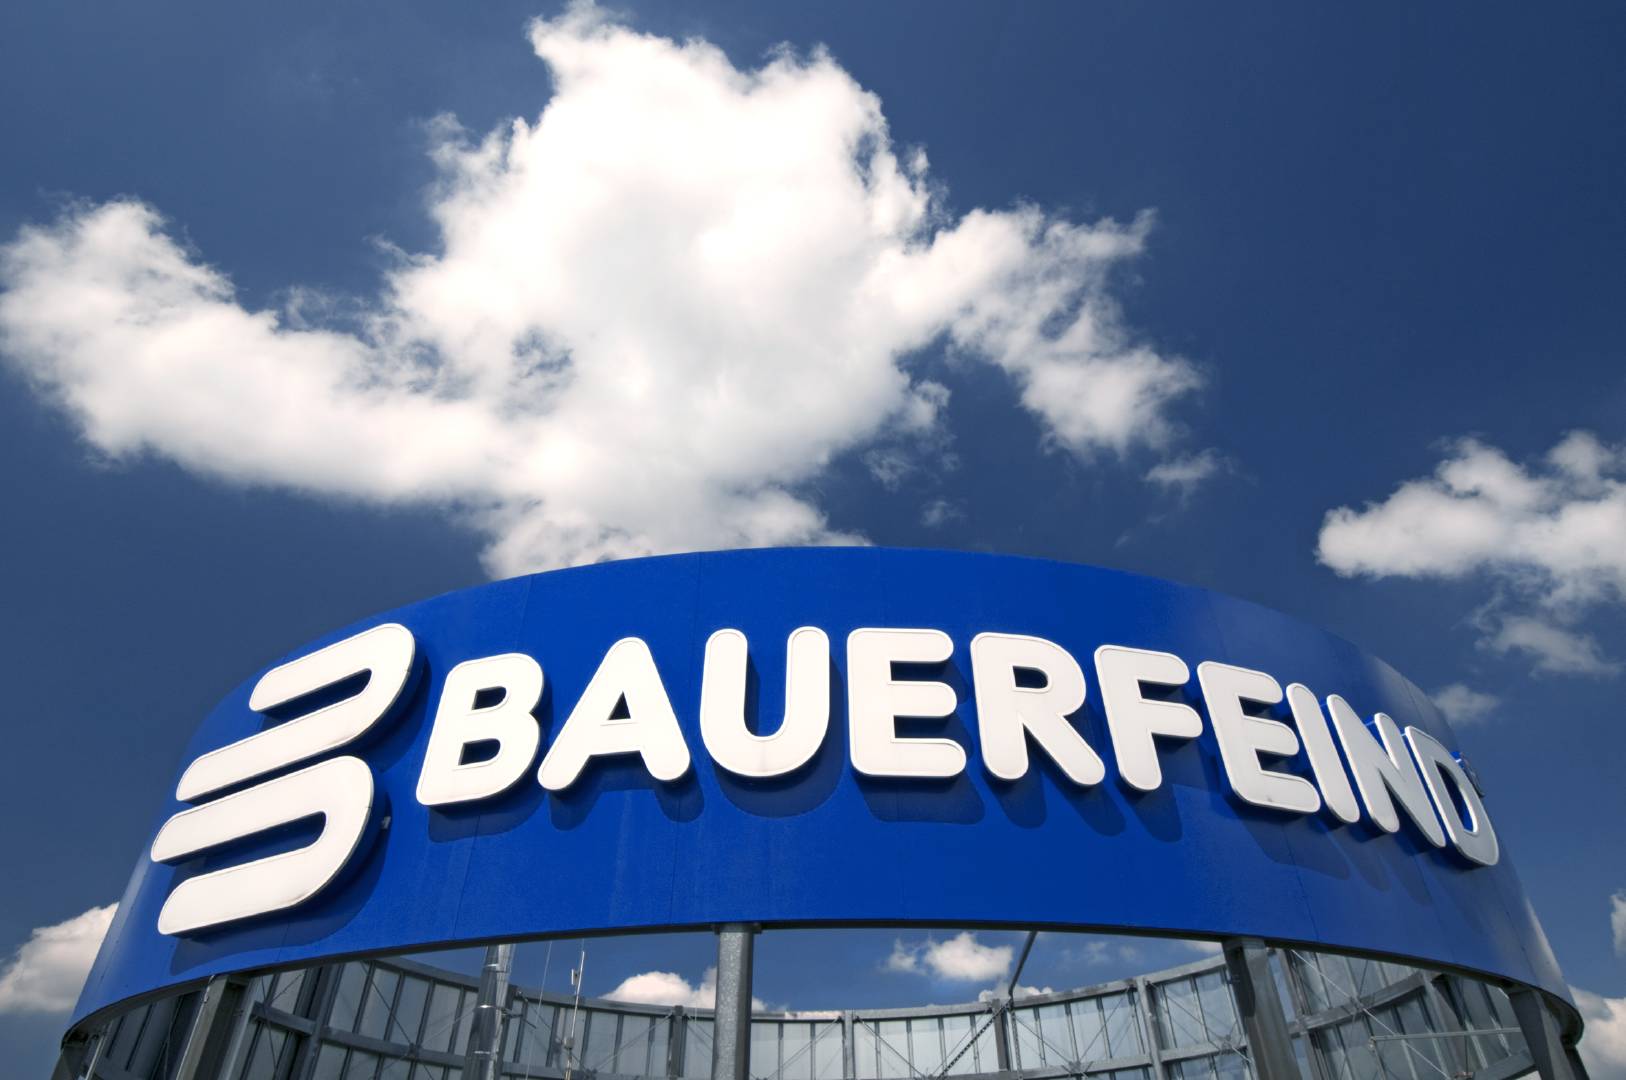 Bauer enemy lettering on a blue surface on the roof of a high -rise building above it blue sky with a cloud